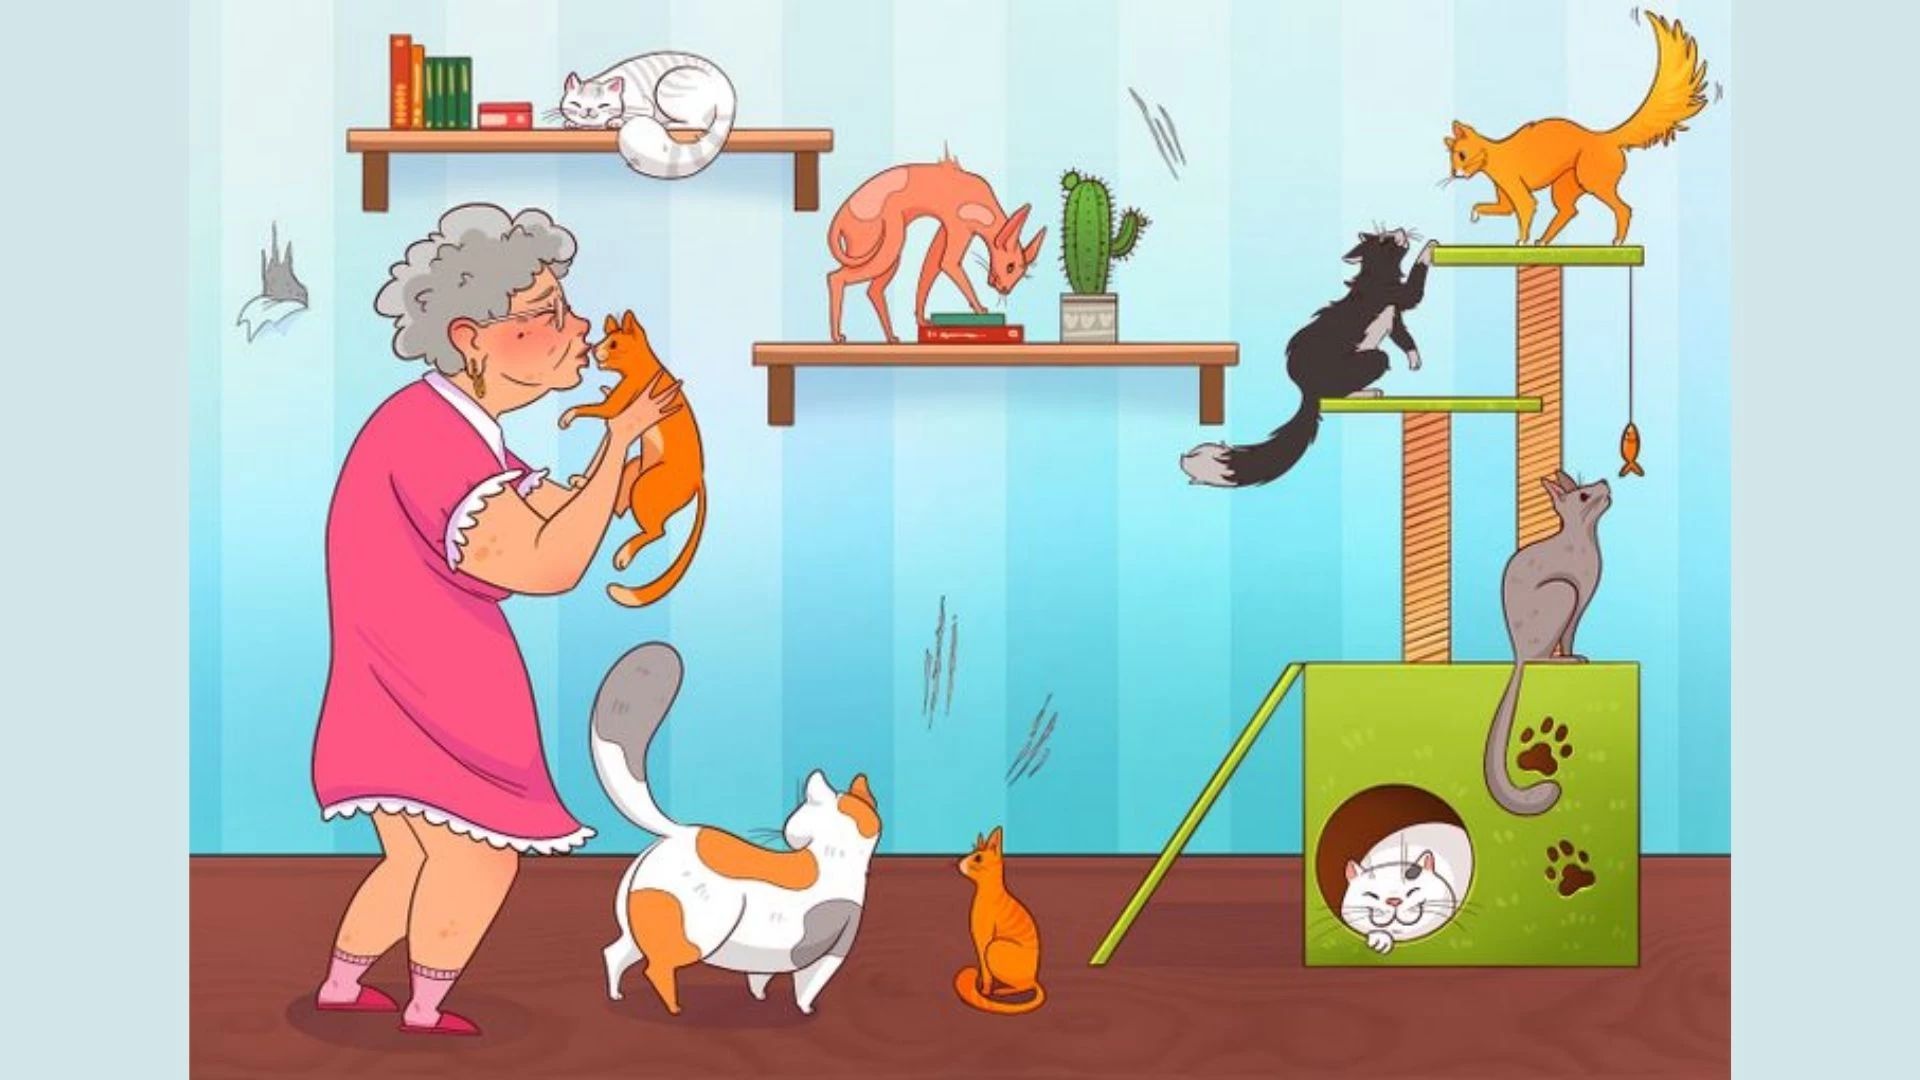 Only 50/50 HD Vision People Can Spot Mistake in Granny’s Cat Room Picture